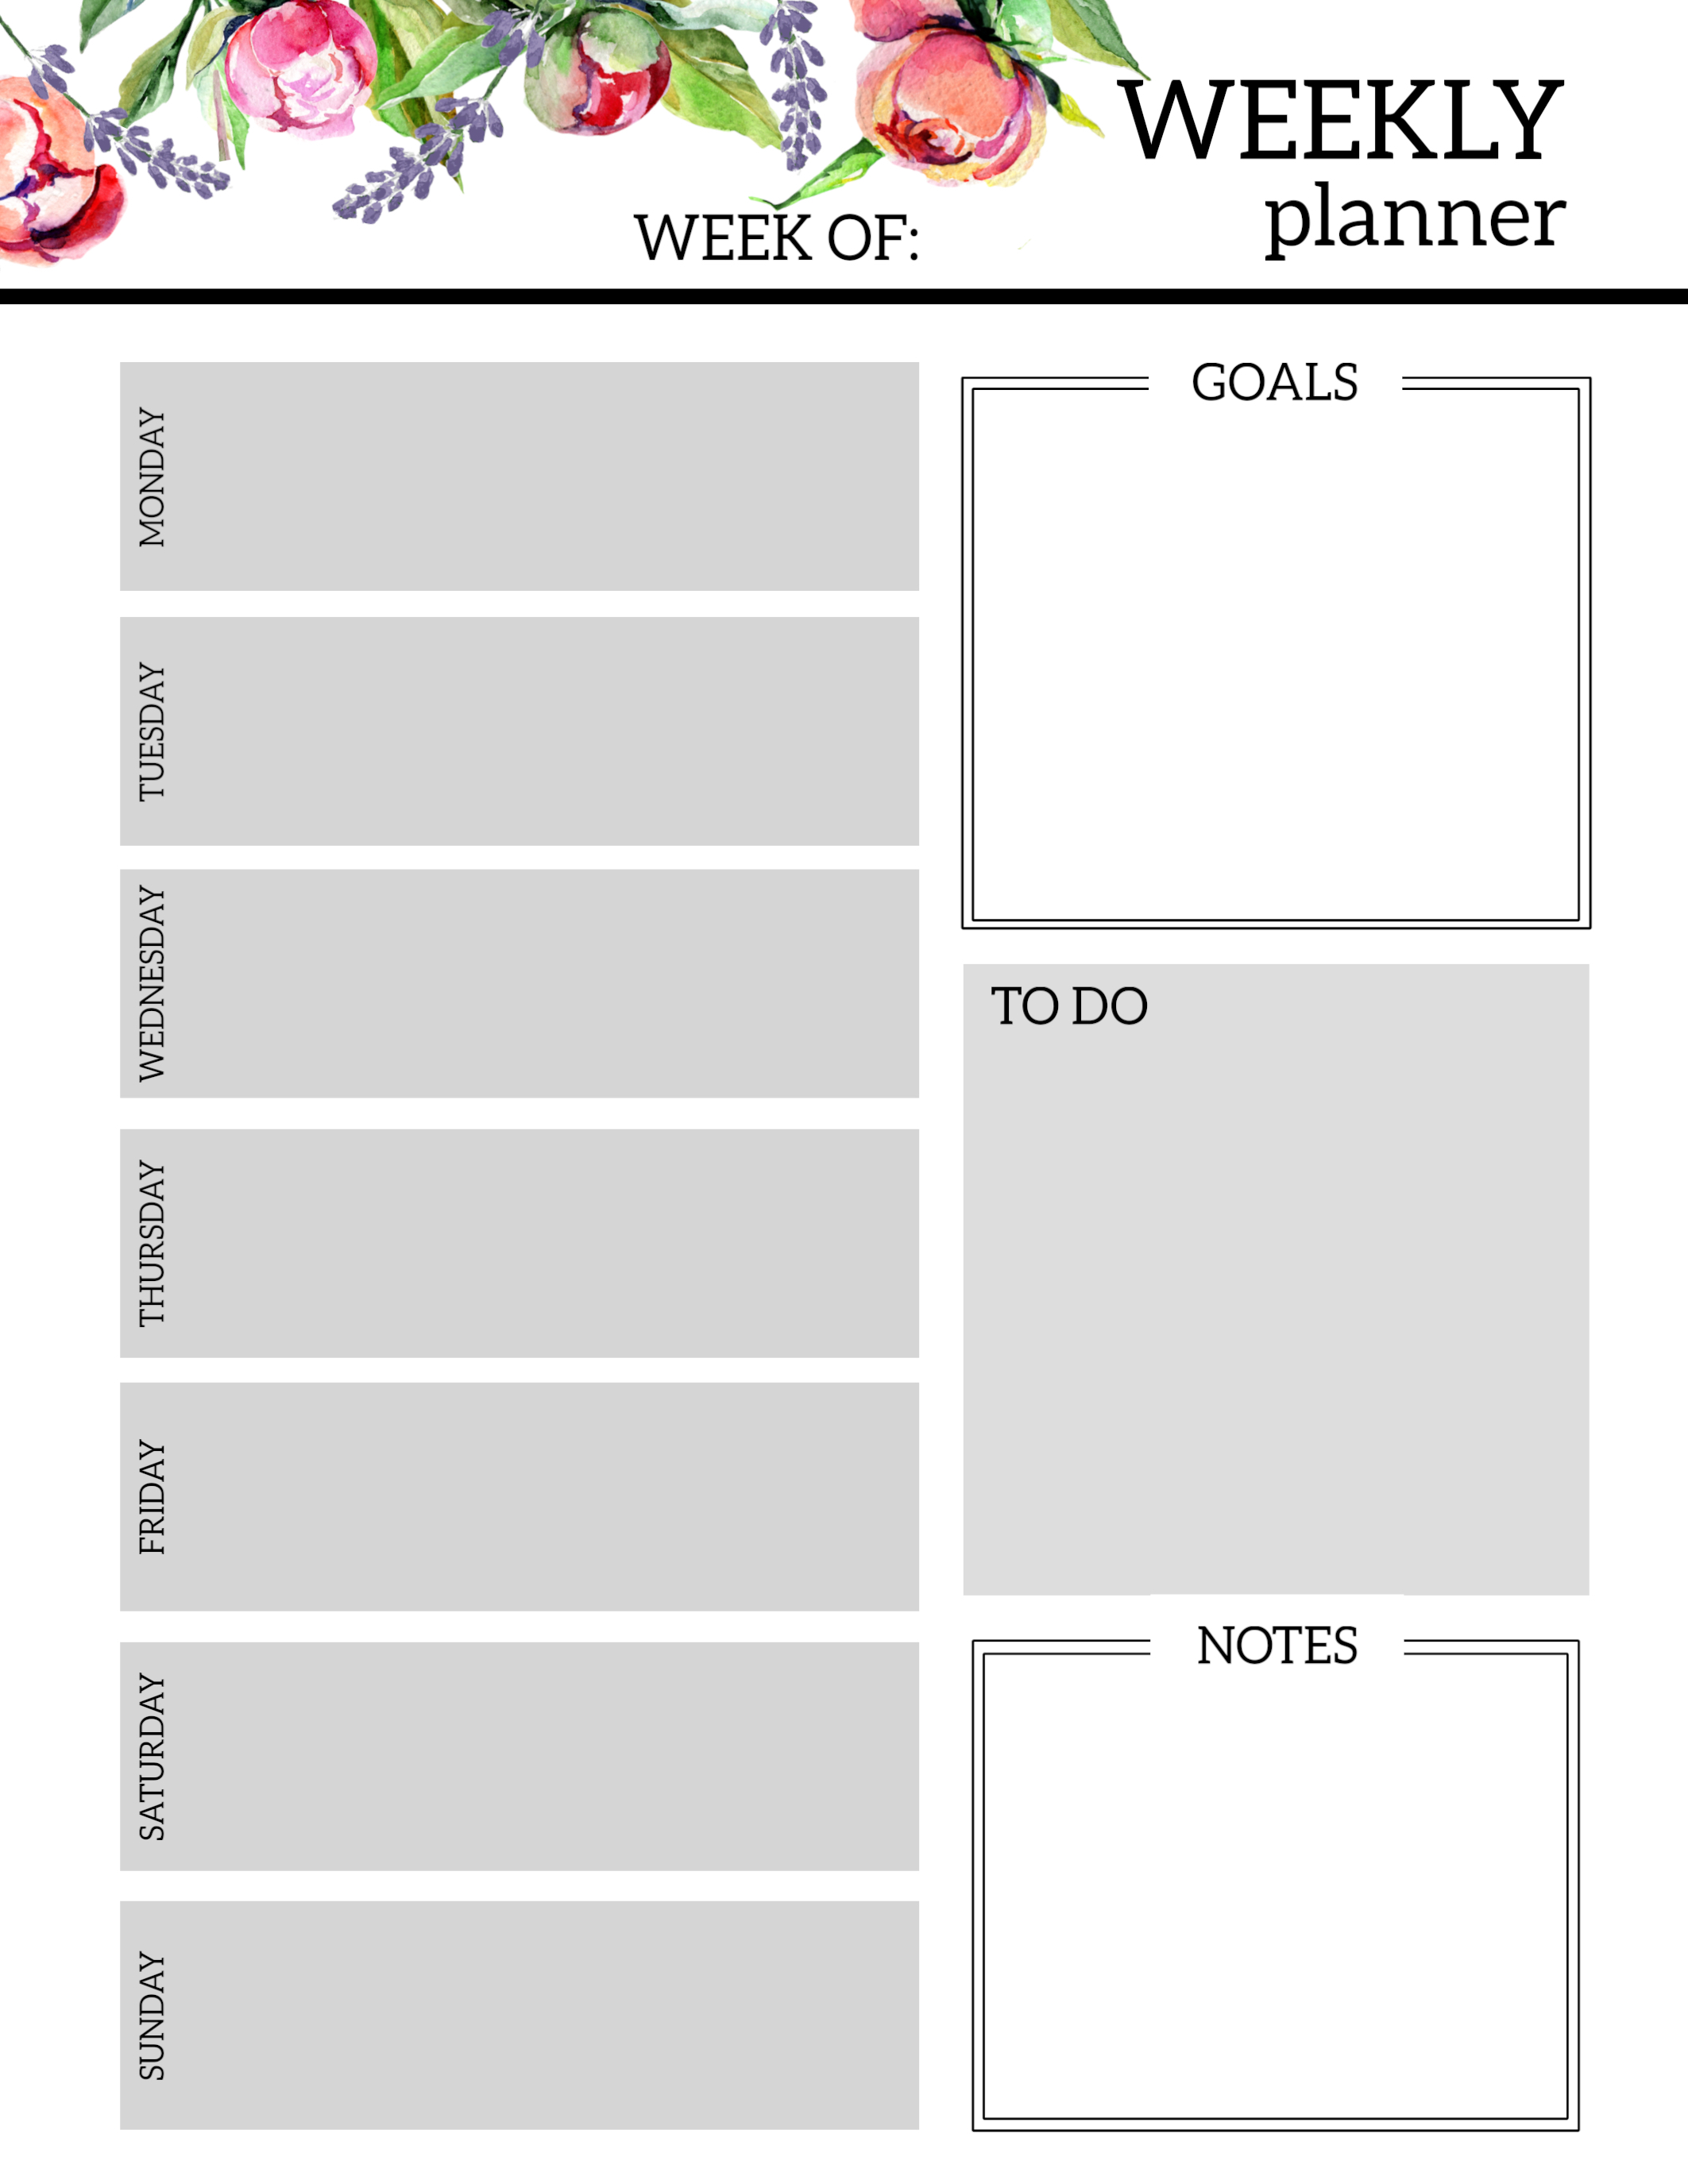 Template Weekly Schedule from www.papertraildesign.com